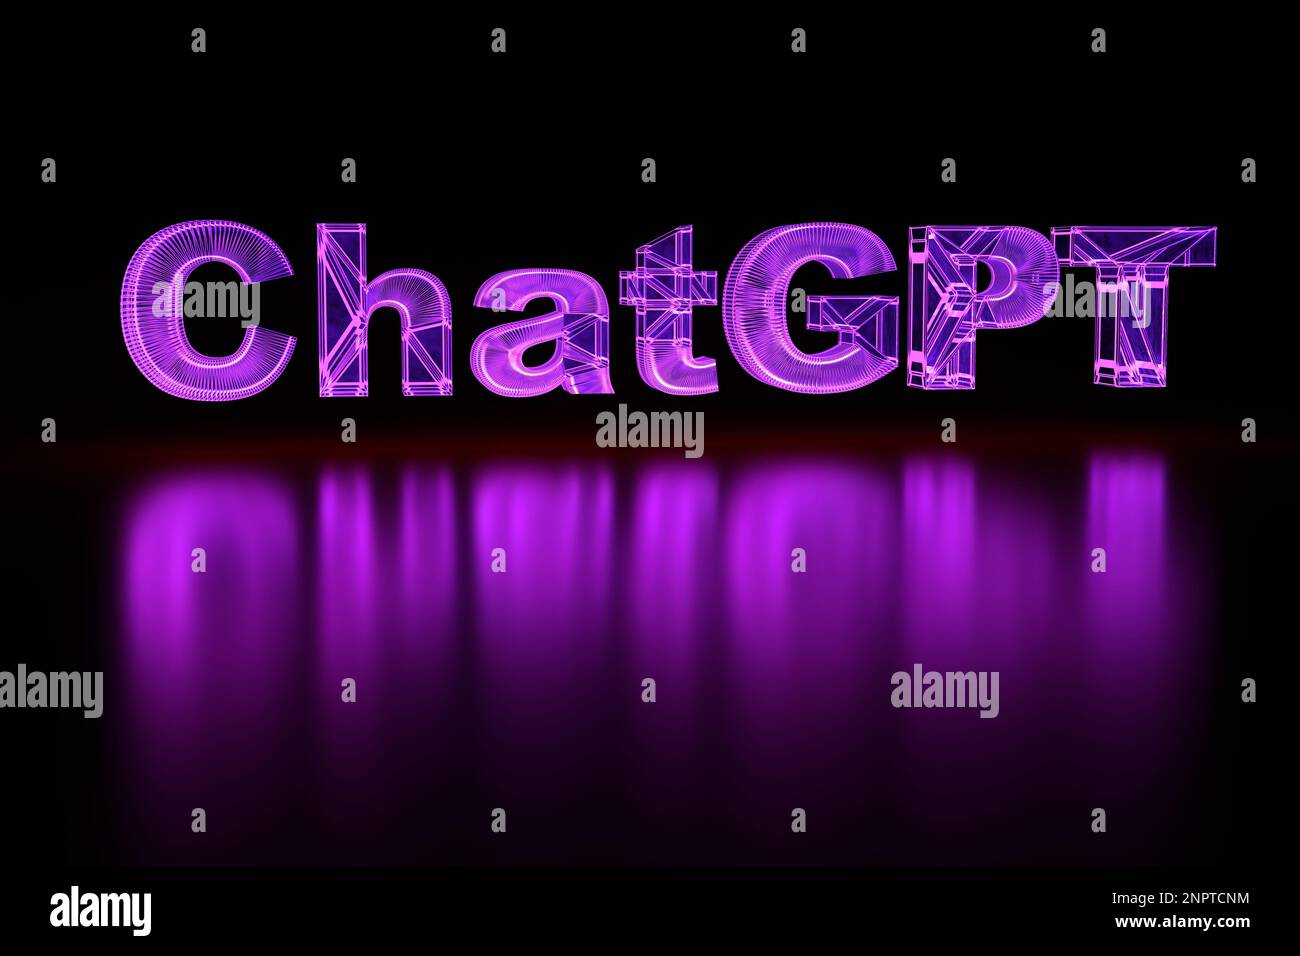 February 20, 2023- Caen, France: An inscription made of neon glowing letters in purple - chatGPT. 3D render. Stock Photo